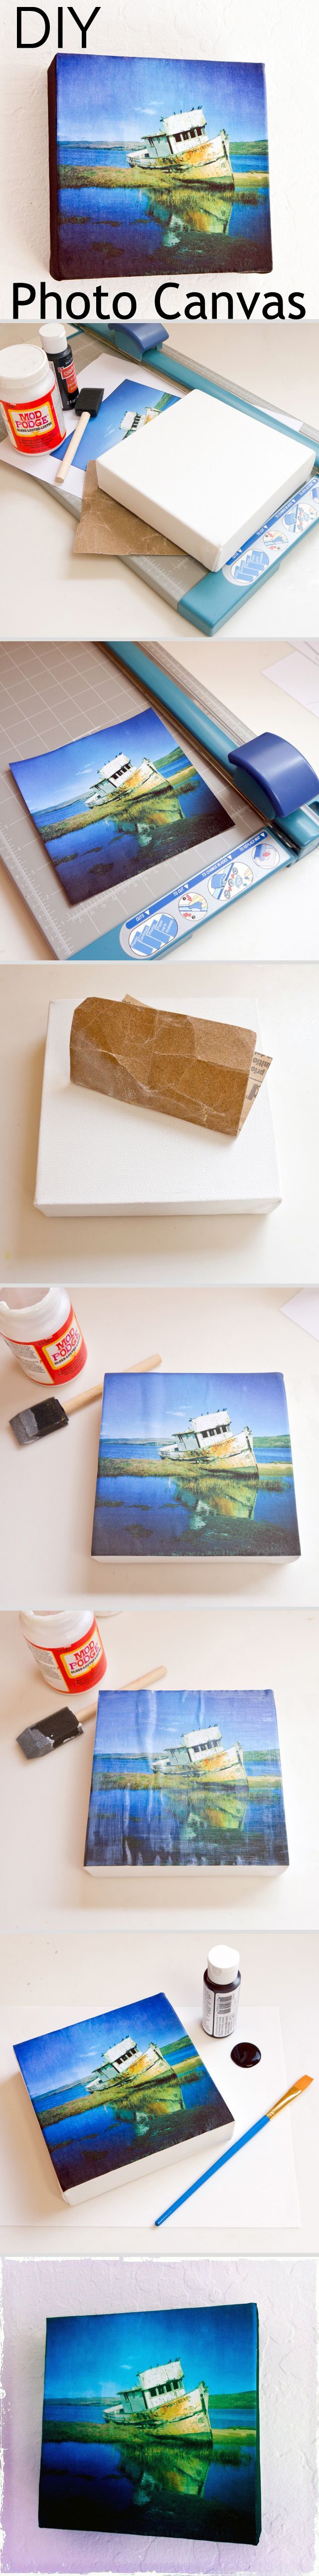 Make your own photo canvas.